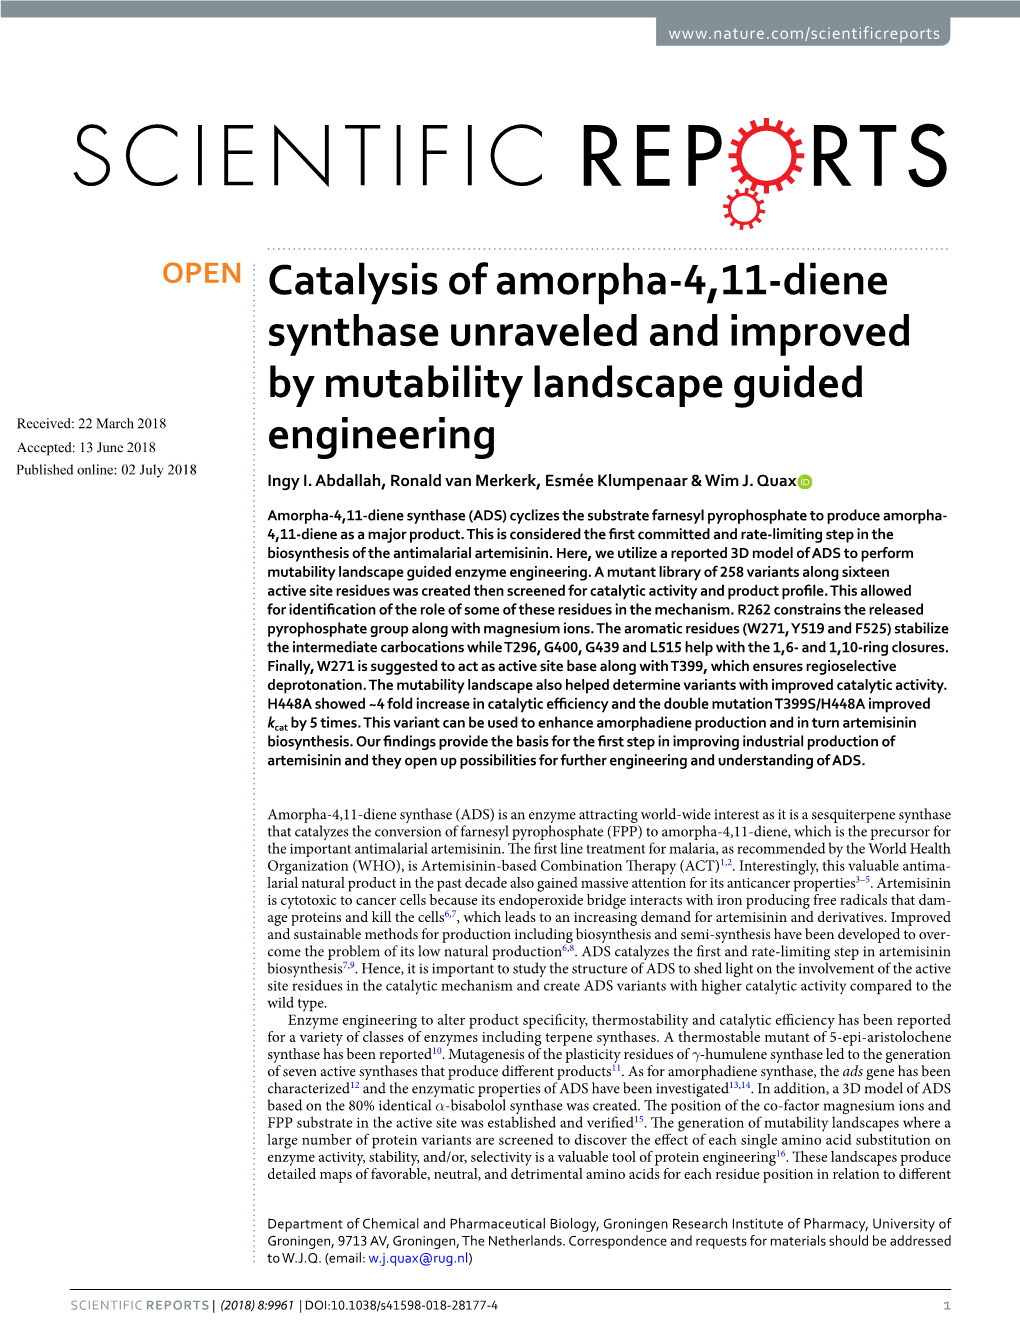 Catalysis of Amorpha-4,11-Diene Synthase Unraveled and Improved